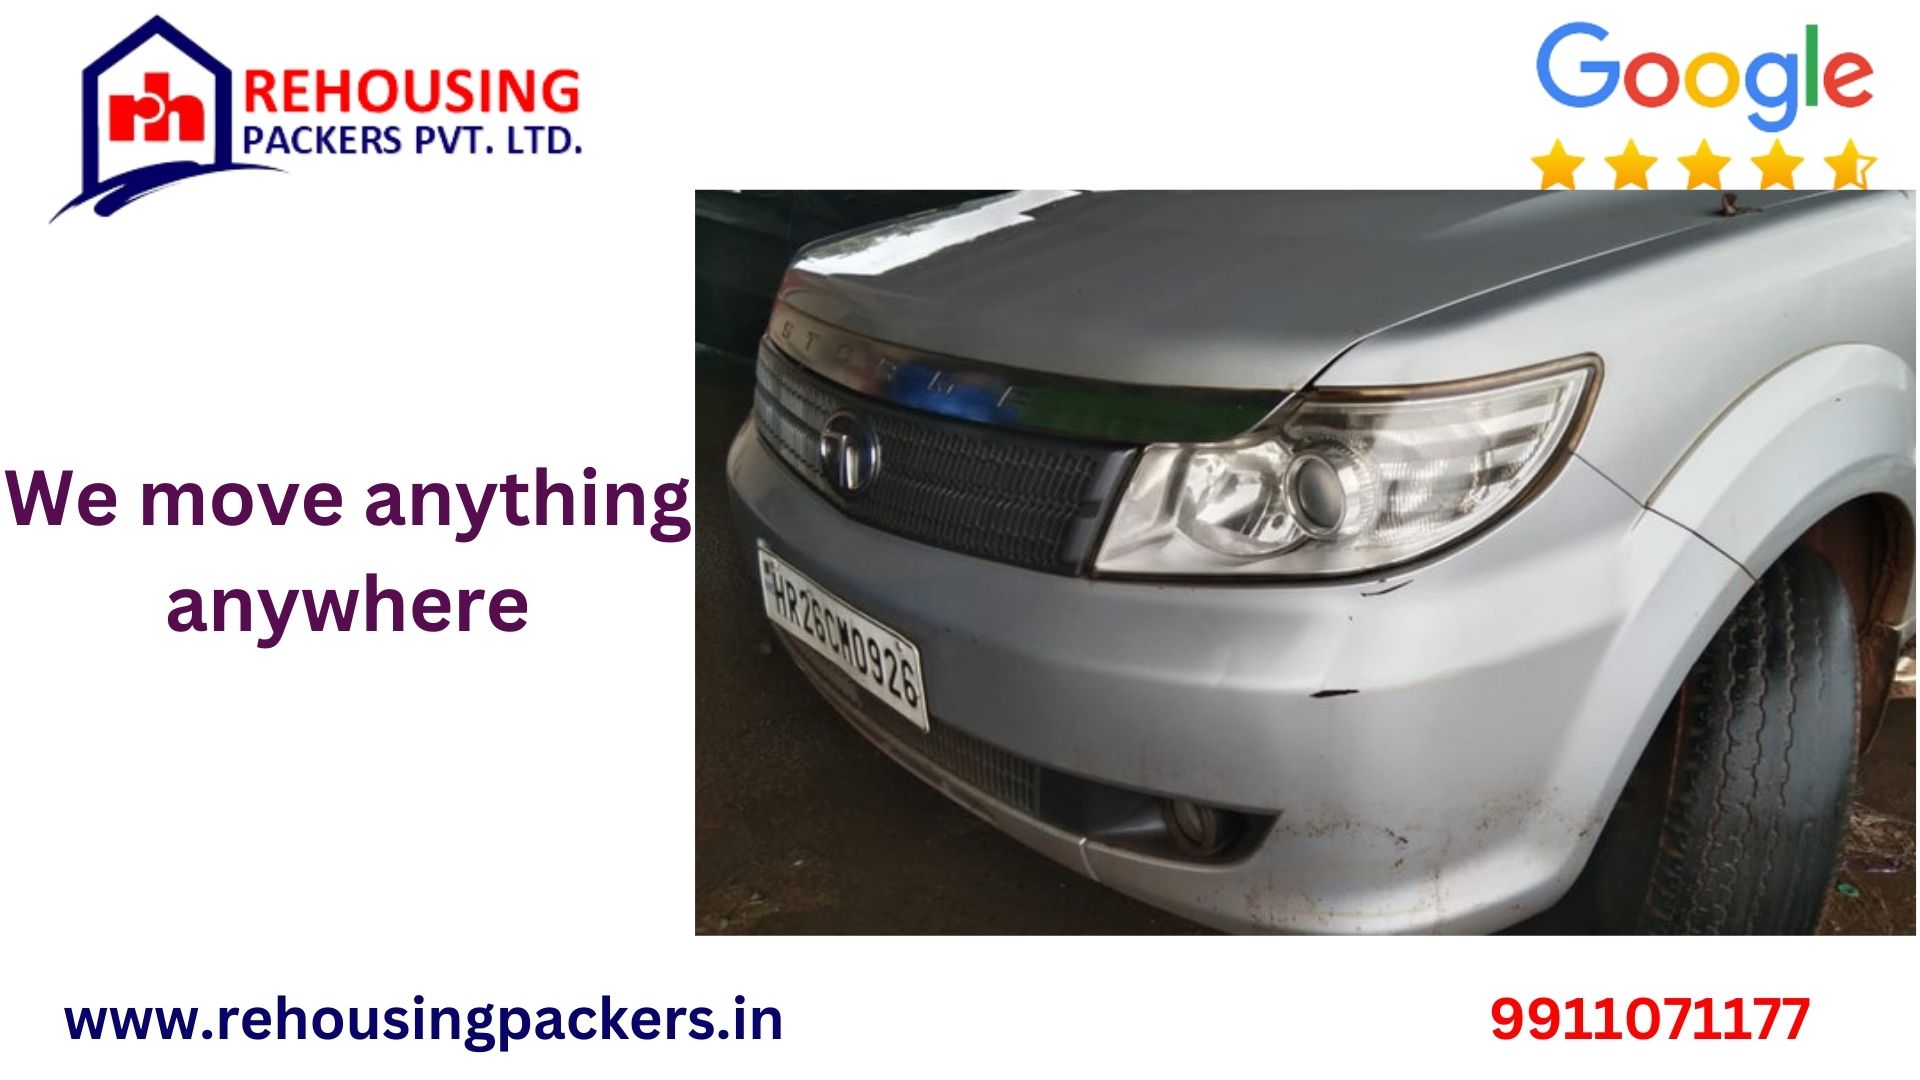 Packers and Movers from Jaipur to Noida